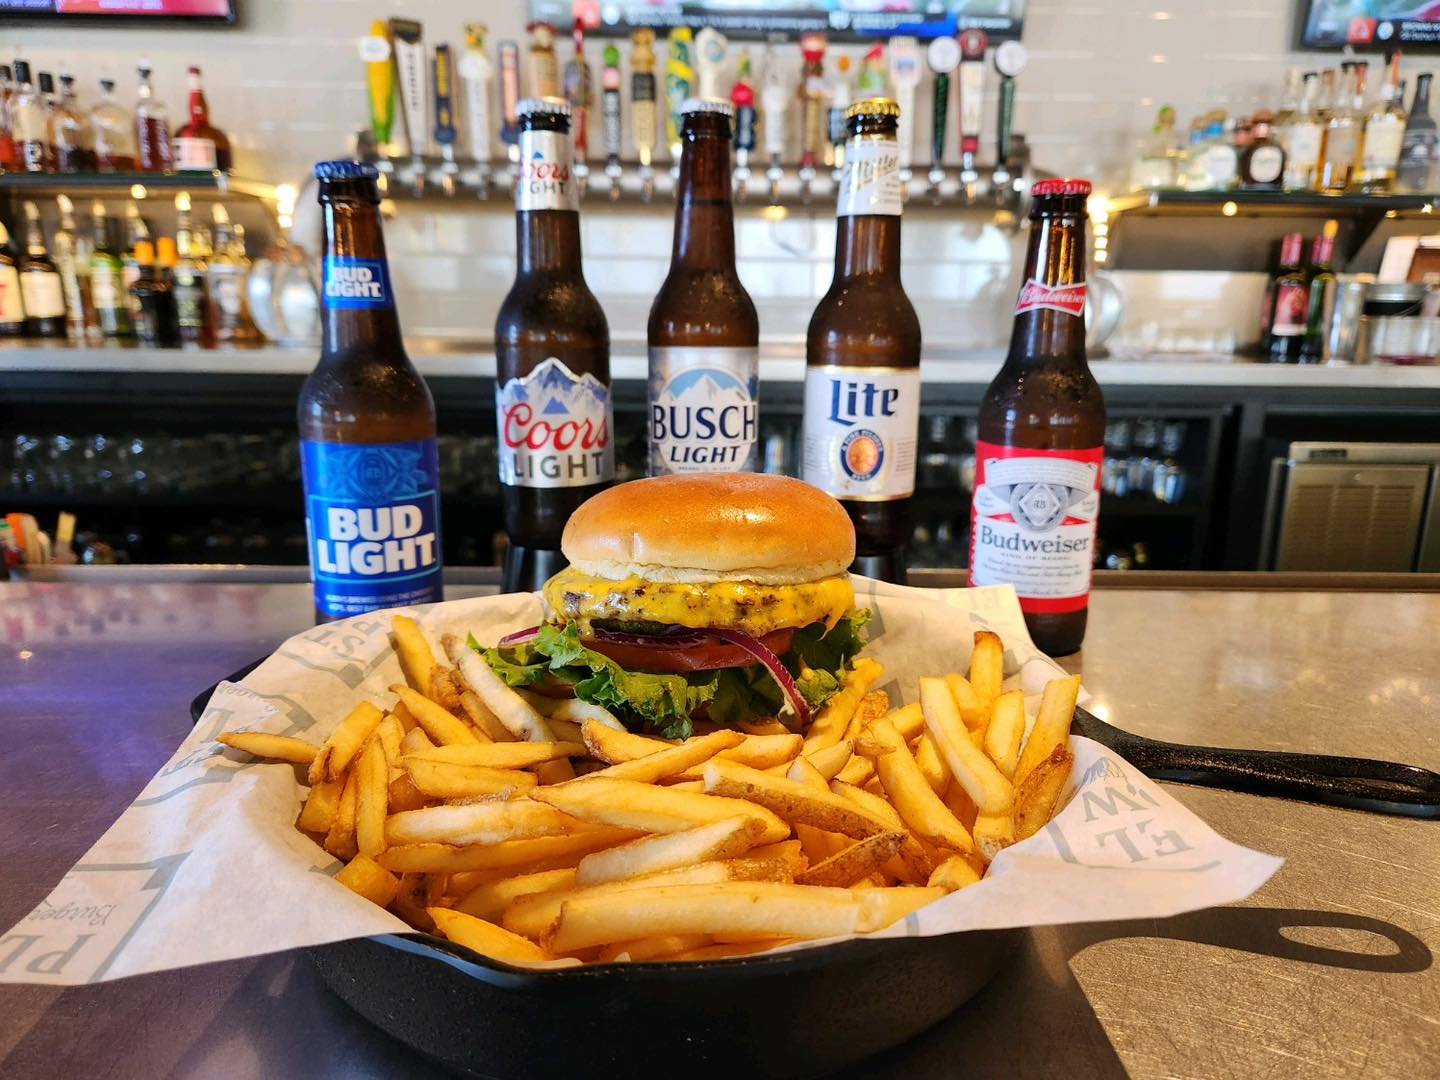 🍺🍔 MONDAY SPECIAL!! 🍔 🍺 

For only $9.49 you get enjoy one of our famous cheeseburgers, fries AND a bottle of your favorite domestic beer!!!

Come see us in Davenport or Moline for this STEAL!!